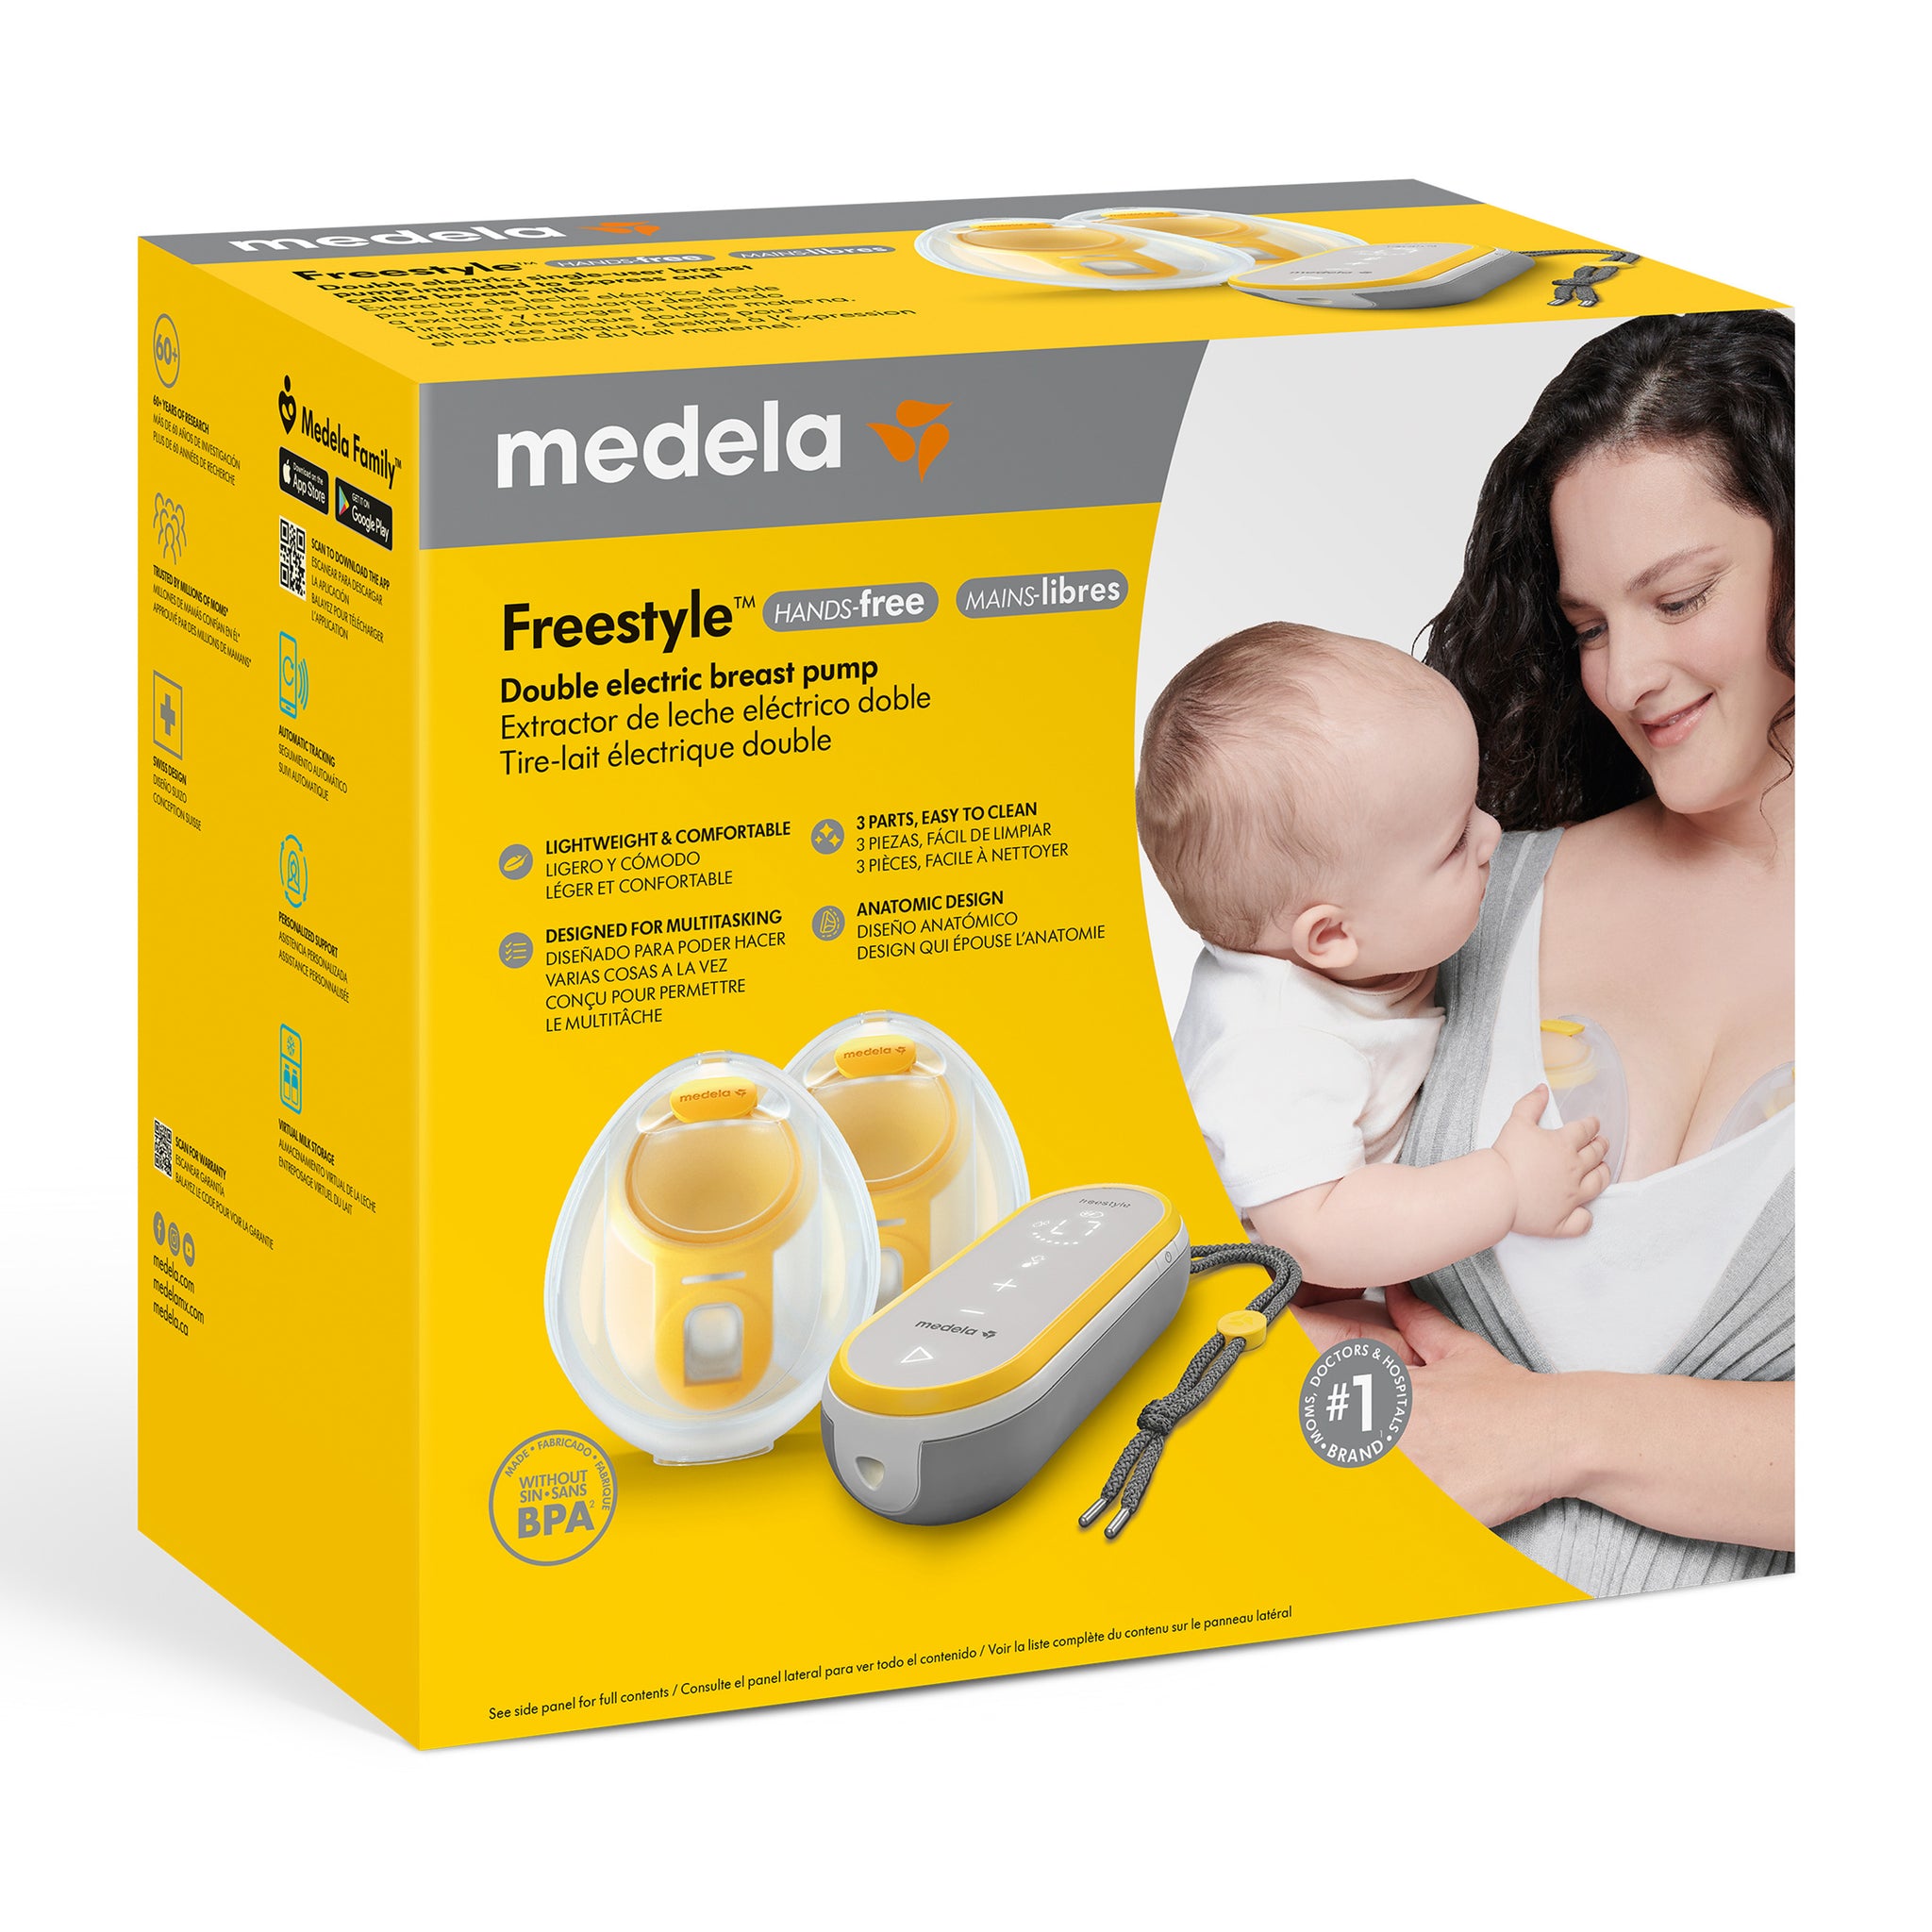 Medela Freestyle Breast Pump - Live Life Your Way With This Double Electric  Breast Pump! – The Breast Pump Store